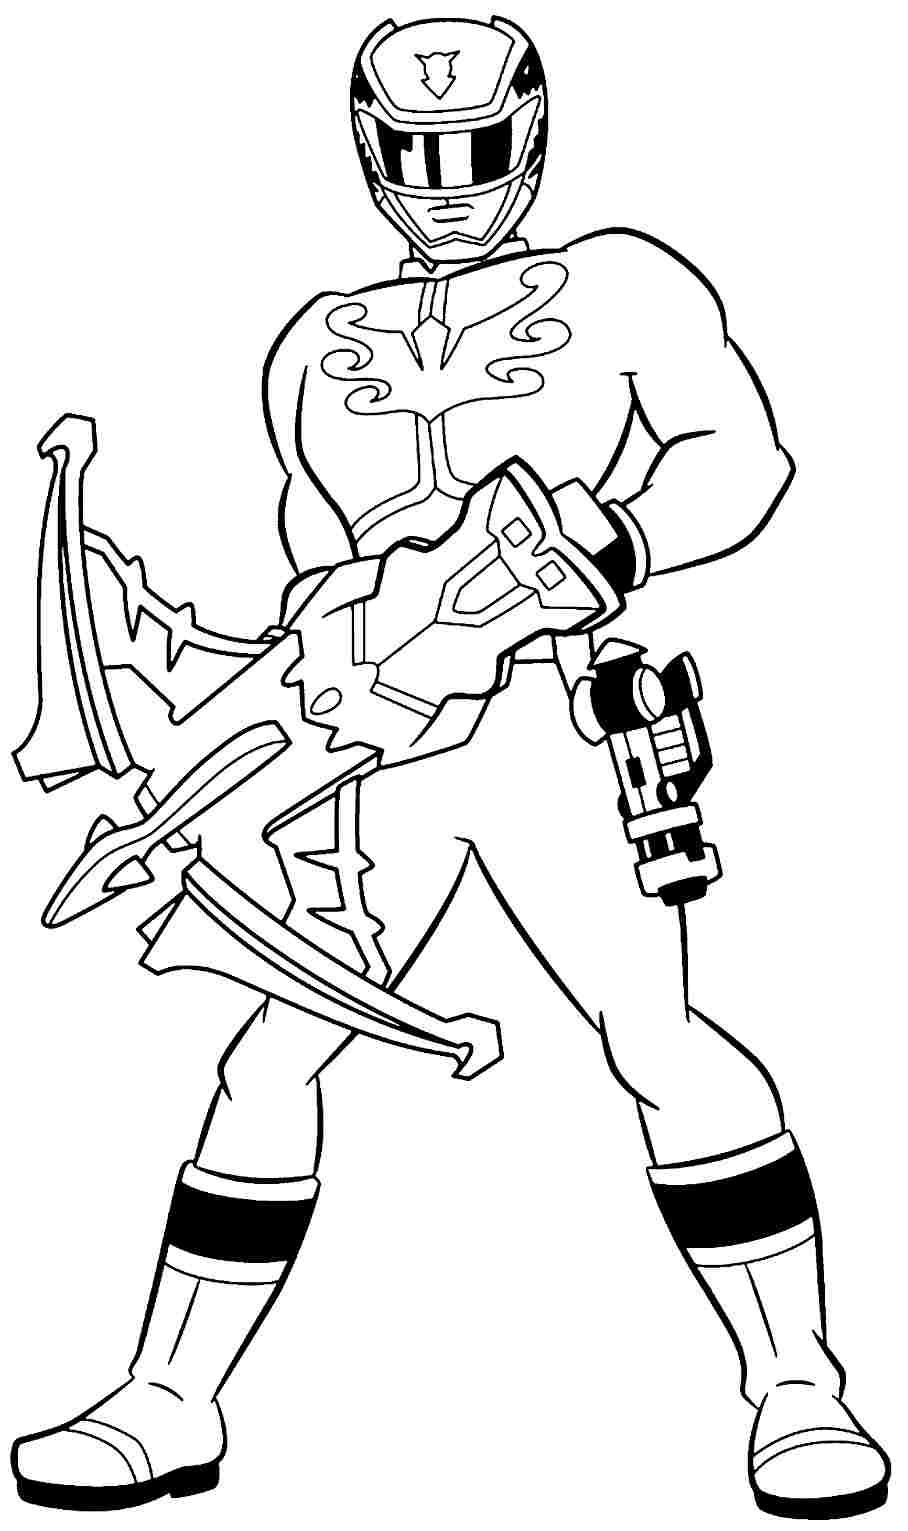 Mini Force Coloring Pages
 Megaforce Power Rangers Coloring Pages Printable